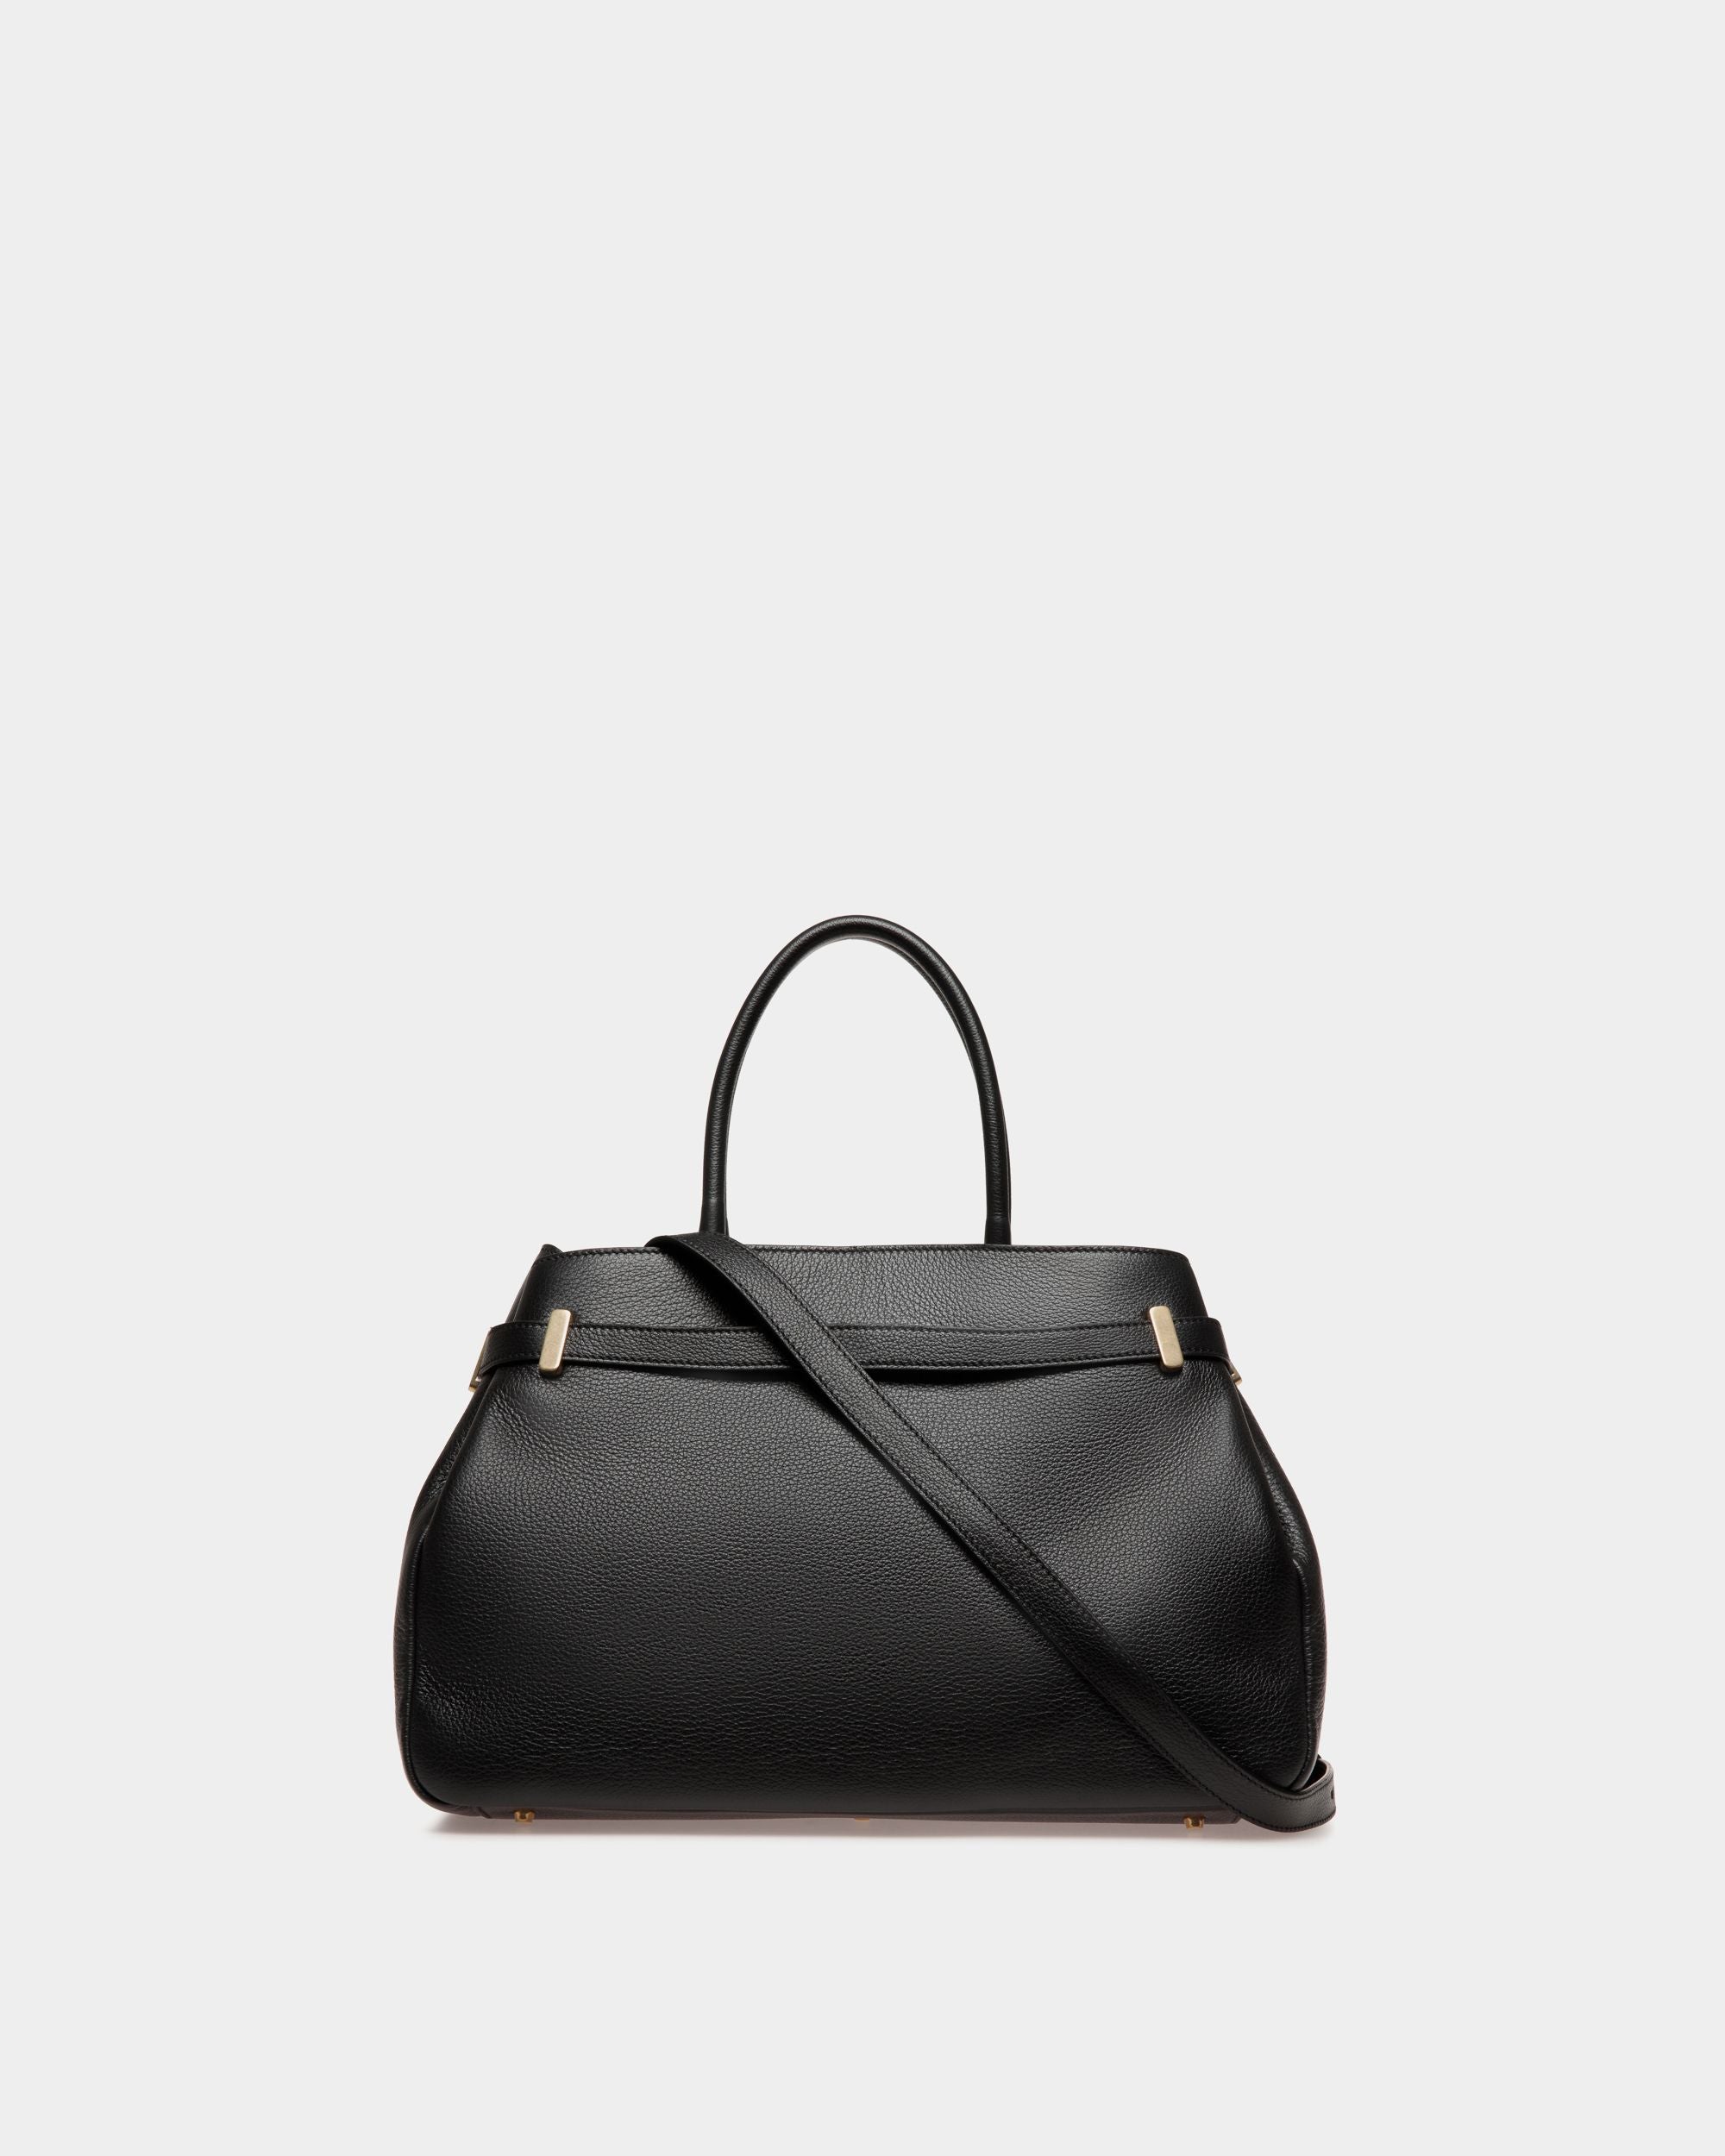 Carriage | Women's Tote in Black Leather | Bally | Still Life Back